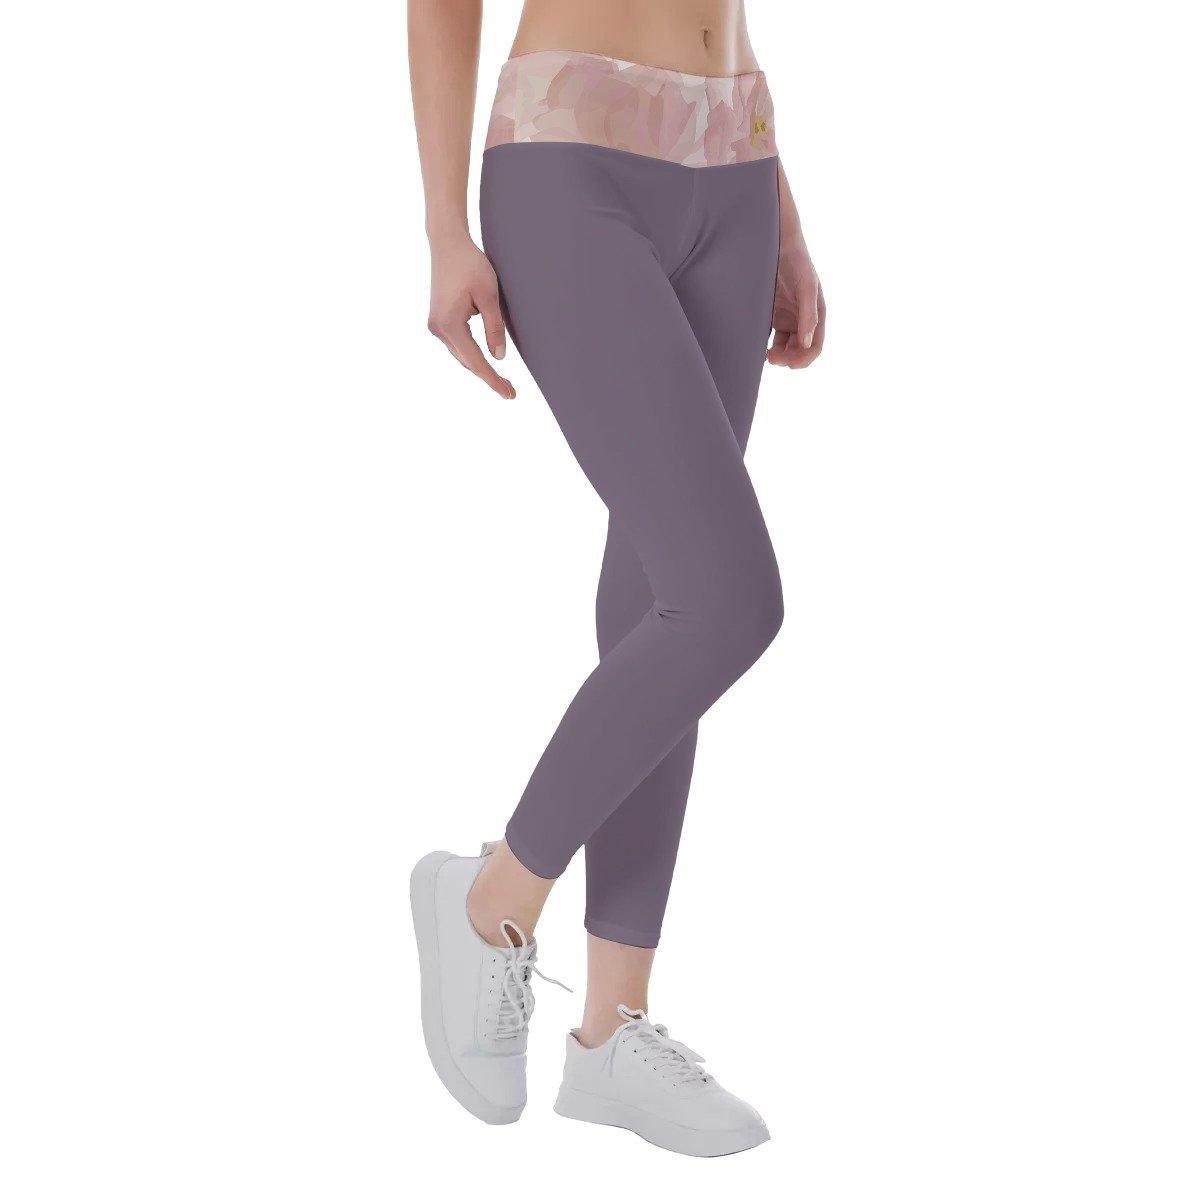 Super and Soft Women's Yoga Leggings - Personal Hour for Yoga and Meditations 